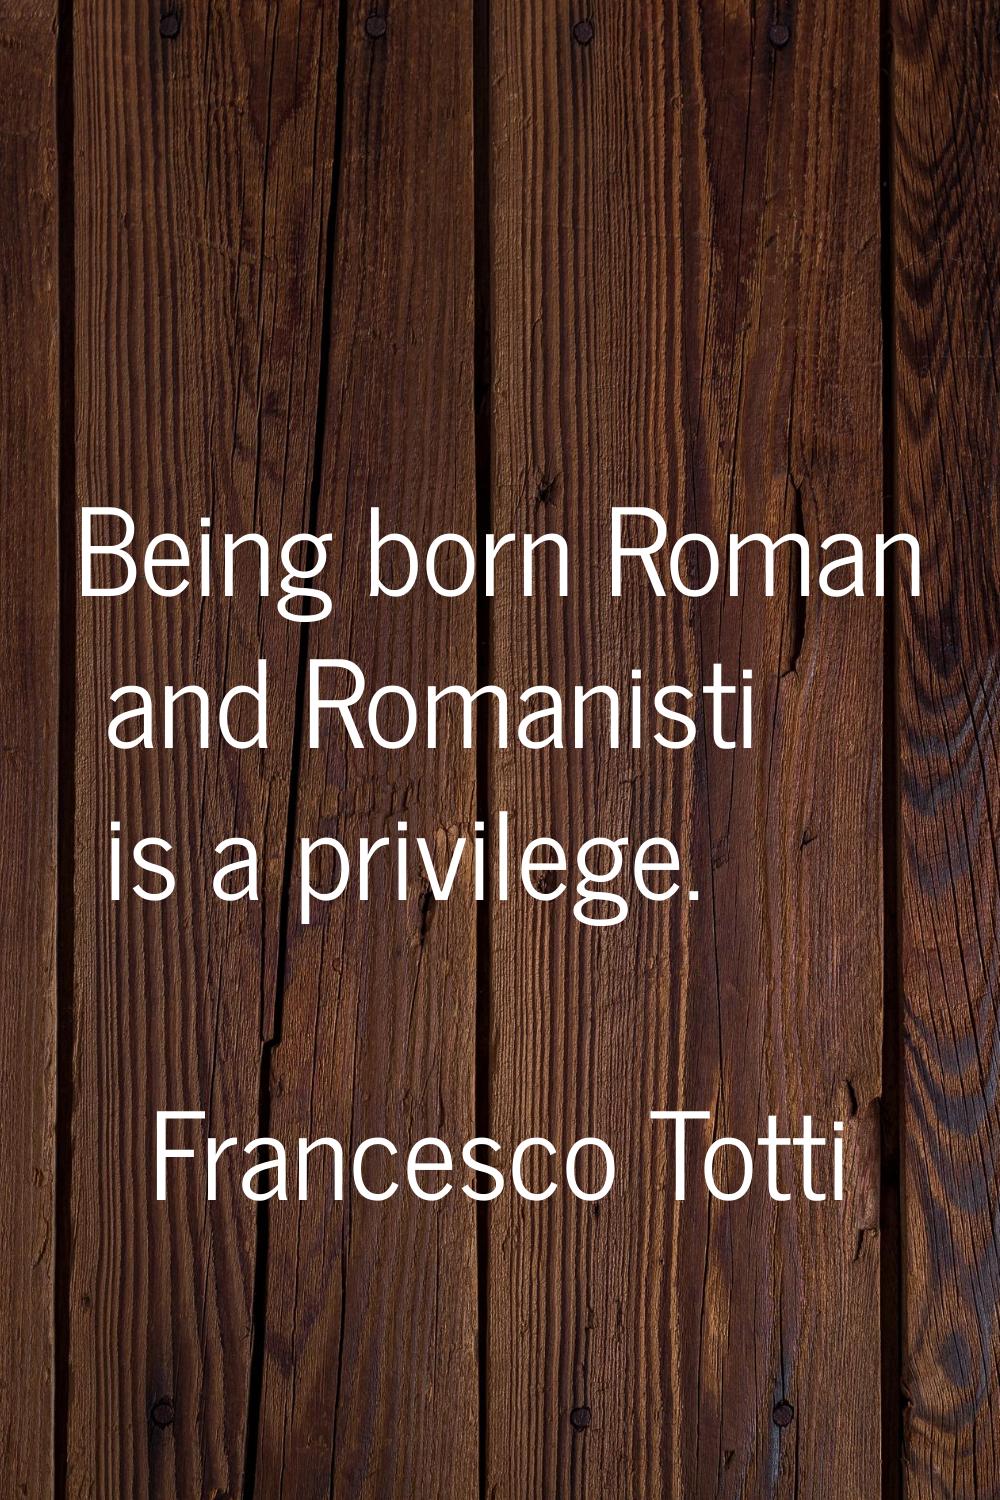 Being born Roman and Romanisti is a privilege.